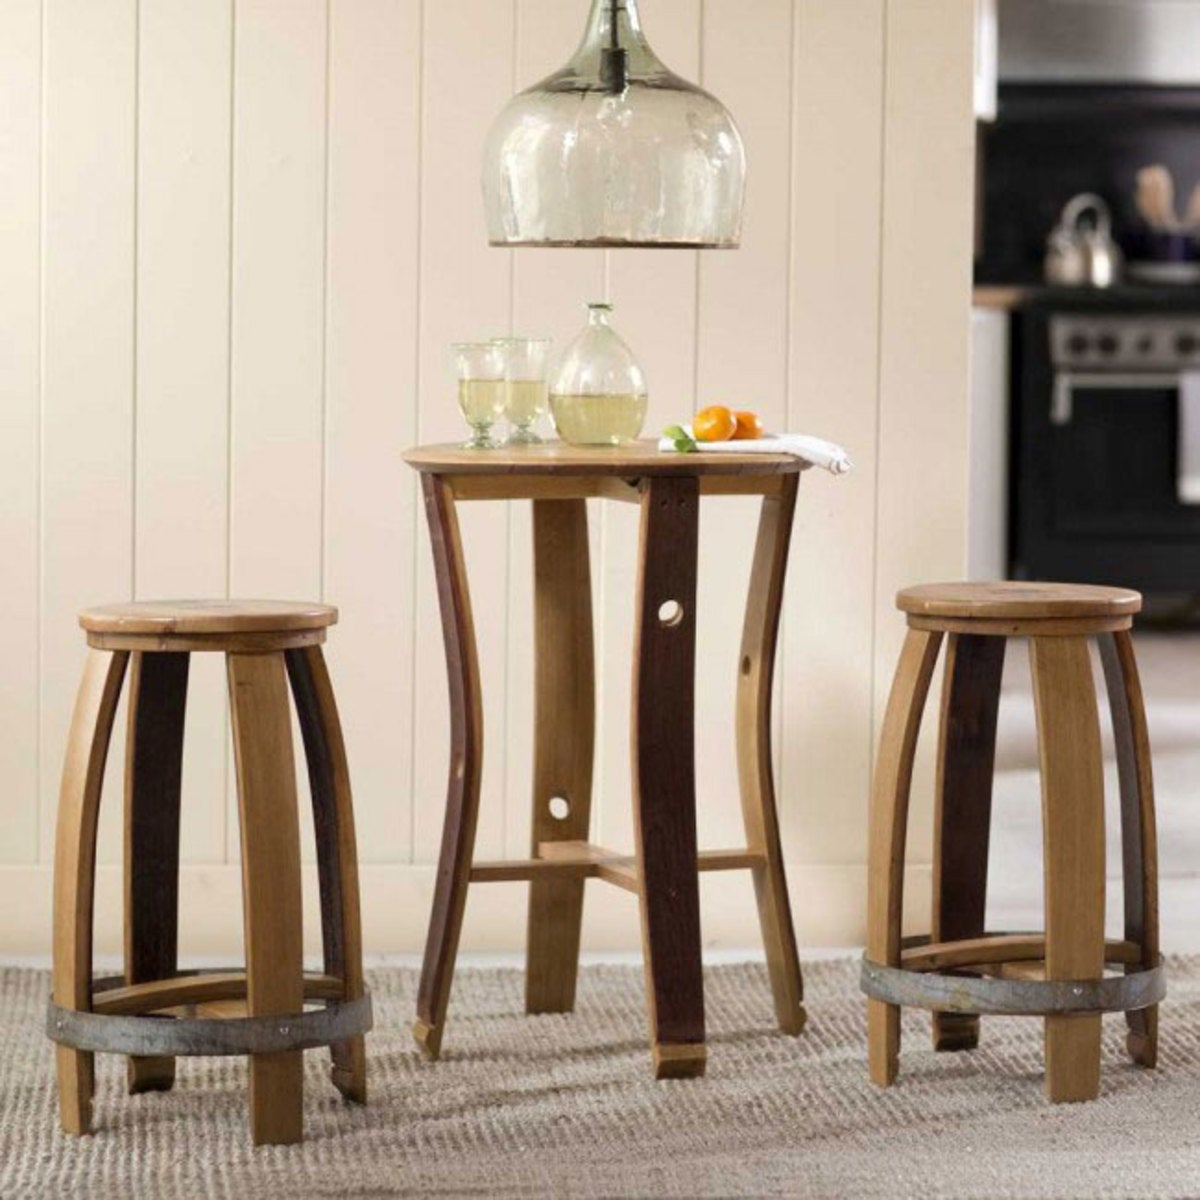 Barrel Stave Café Table and Stools